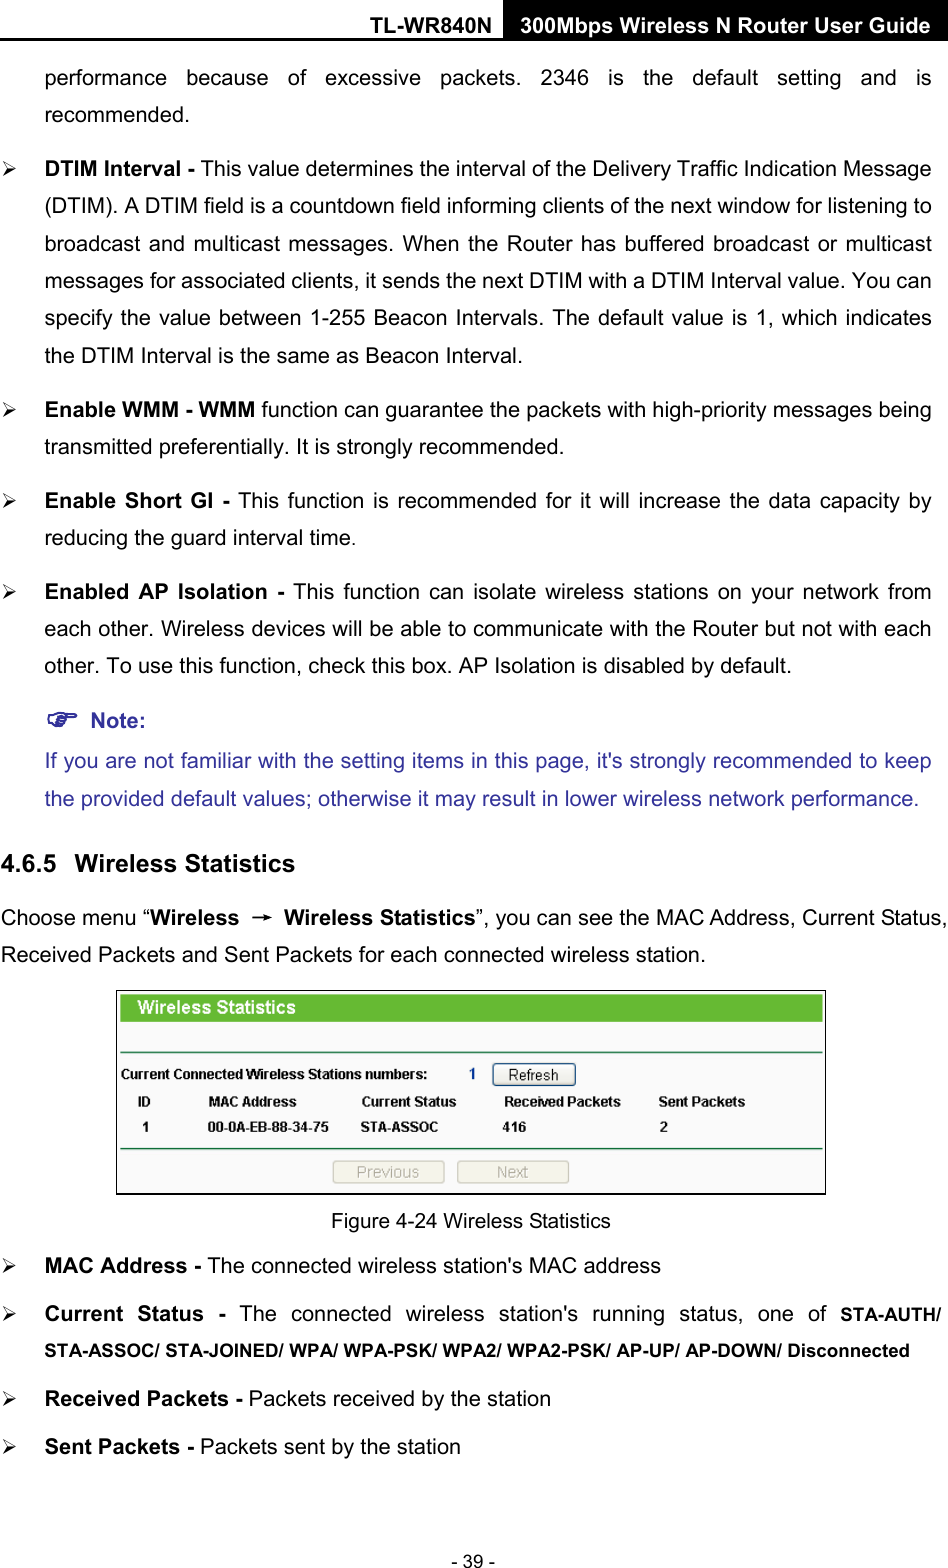 TL-WR840N 300Mbps Wireless N Router User Guide  - 39 - performance  because of excessive packets. 2346 is the default setting and is recommended.    DTIM Interval - This value determines the interval of the Delivery Traffic Indication Message (DTIM). A DTIM field is a countdown field informing clients of the next window for listening to broadcast and multicast messages. When  the Router has buffered broadcast or multicast messages for associated clients, it sends the next DTIM with a DTIM Interval value. You can specify the value between 1-255 Beacon Intervals. The default value is 1, which indicates the DTIM Interval is the same as Beacon Interval.    Enable WMM - WMM function can guarantee the packets with high-priority messages being transmitted preferentially. It is strongly recommended.    Enable Short GI - This function is recommended for it will increase the data capacity by reducing the guard interval time.    Enabled AP Isolation -  This function can isolate wireless stations on your network from each other. Wireless devices will be able to communicate with the Router but not with each other. To use this function, check this box. AP Isolation is disabled by default.  Note:   If you are not familiar with the setting items in this page, it&apos;s strongly recommended to keep the provided default values; otherwise it may result in lower wireless network performance. 4.6.5 Wireless Statistics Choose menu “Wireless → Wireless Statistics”, you can see the MAC Address, Current Status, Received Packets and Sent Packets for each connected wireless station.  Figure 4-24 Wireless Statistics  MAC Address - The connected wireless station&apos;s MAC address  Current Status -  The connected wireless station&apos;s running status, one of STA-AUTH/ STA-ASSOC/ STA-JOINED/ WPA/ WPA-PSK/ WPA2/ WPA2-PSK/ AP-UP/ AP-DOWN/ Disconnected  Received Packets - Packets received by the station  Sent Packets - Packets sent by the station 